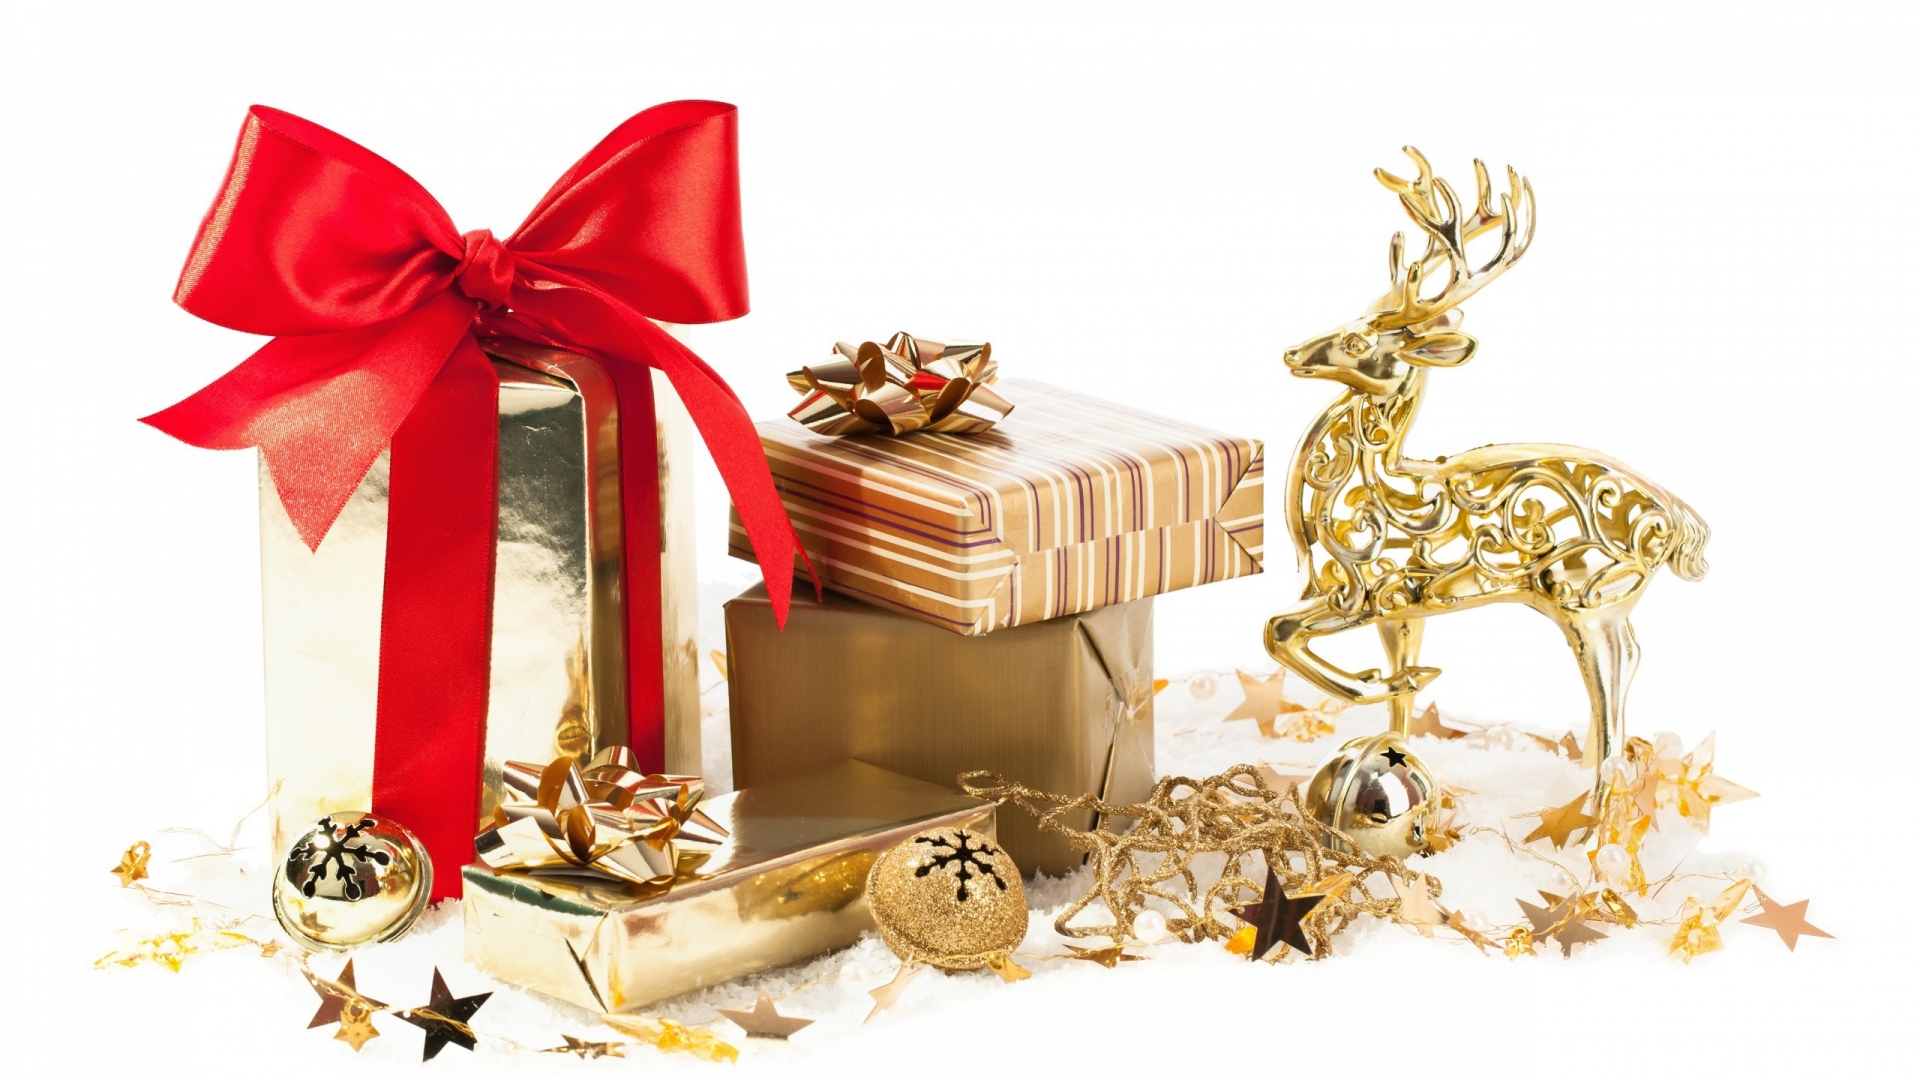 Ready Gifts for Christmas for 1920 x 1080 HDTV 1080p resolution